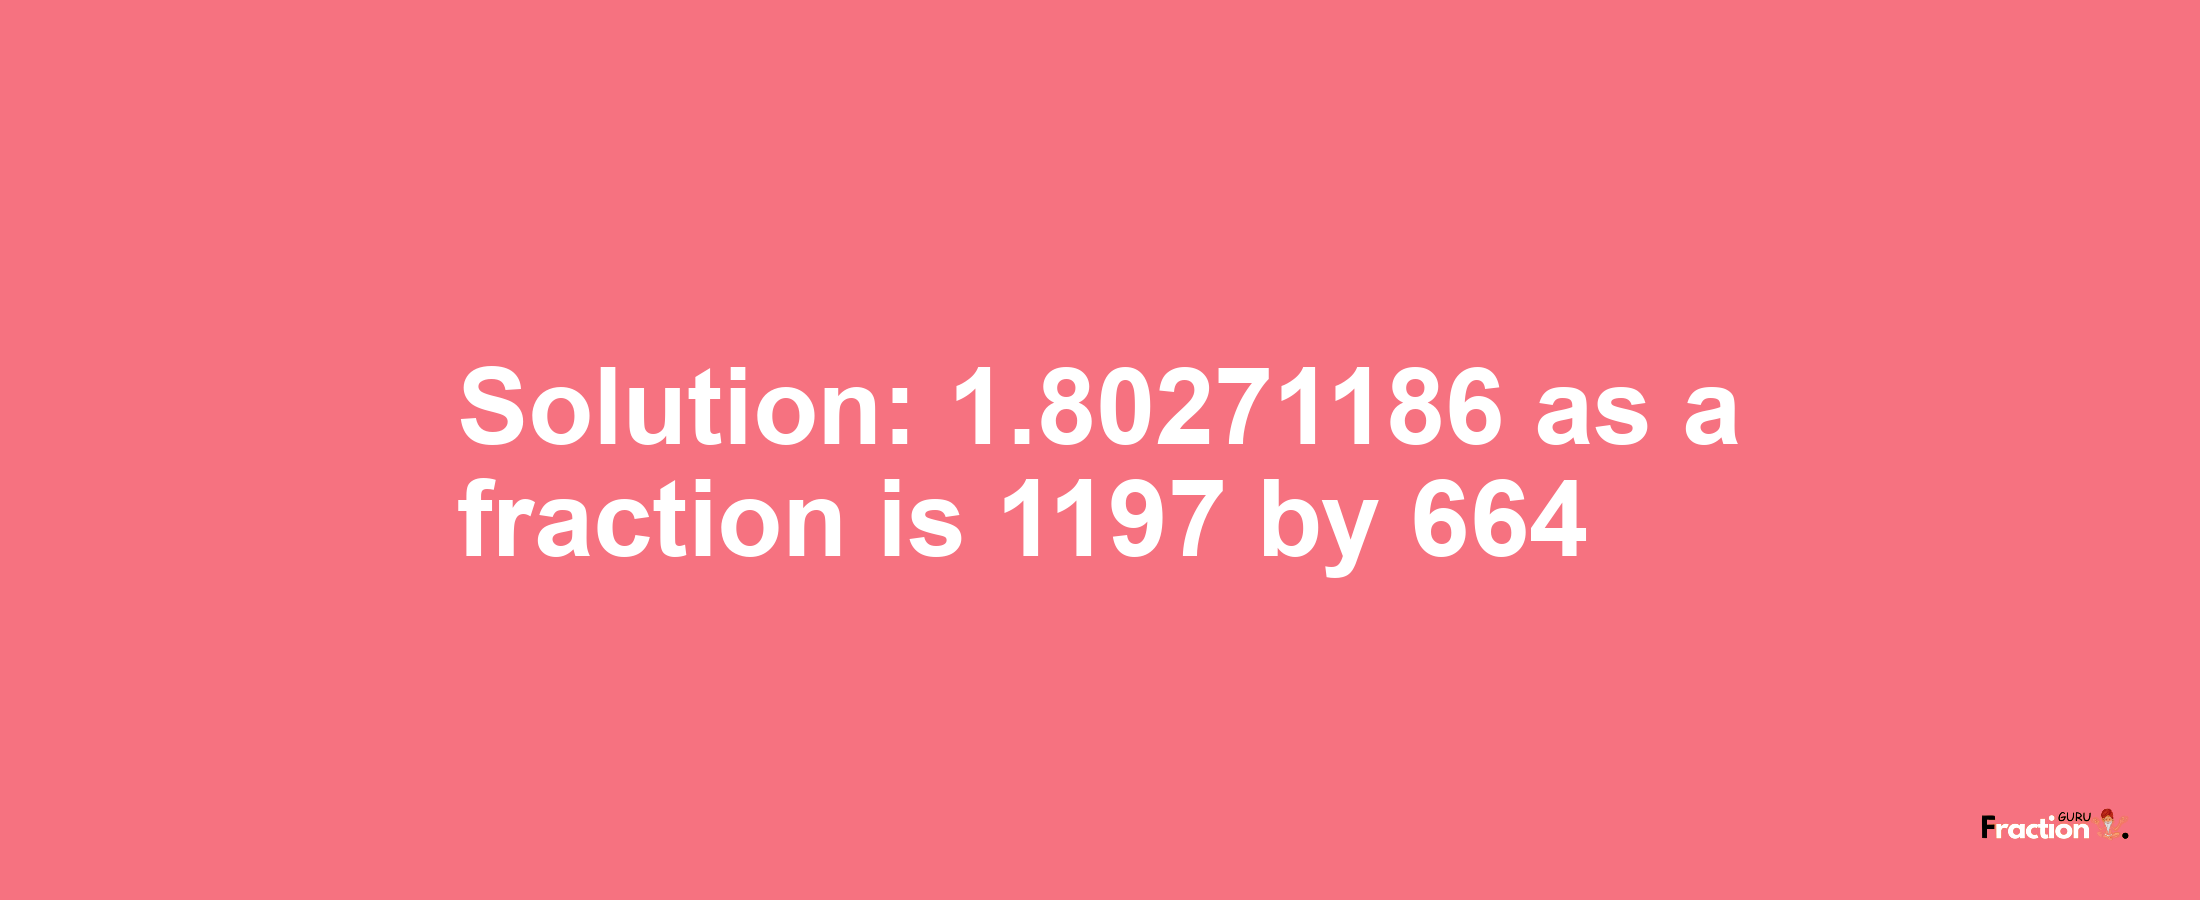 Solution:1.80271186 as a fraction is 1197/664